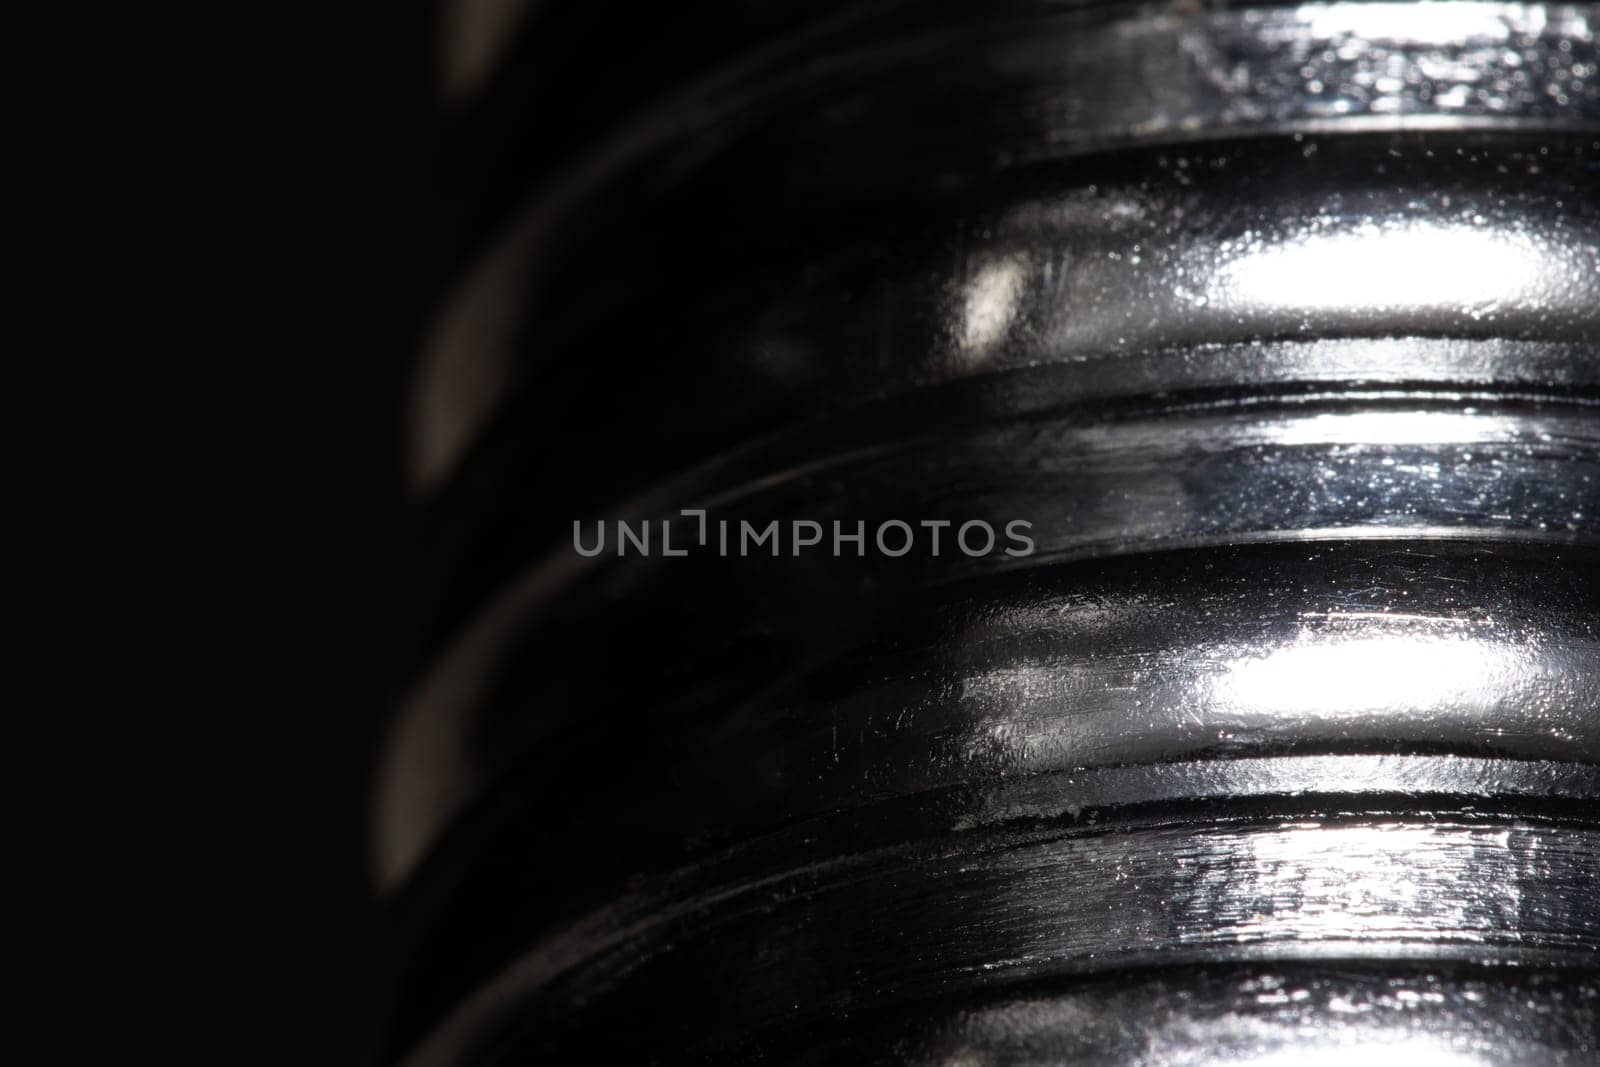 Close up of the thread of a metallic screw on black background, textured metal, abstract macro